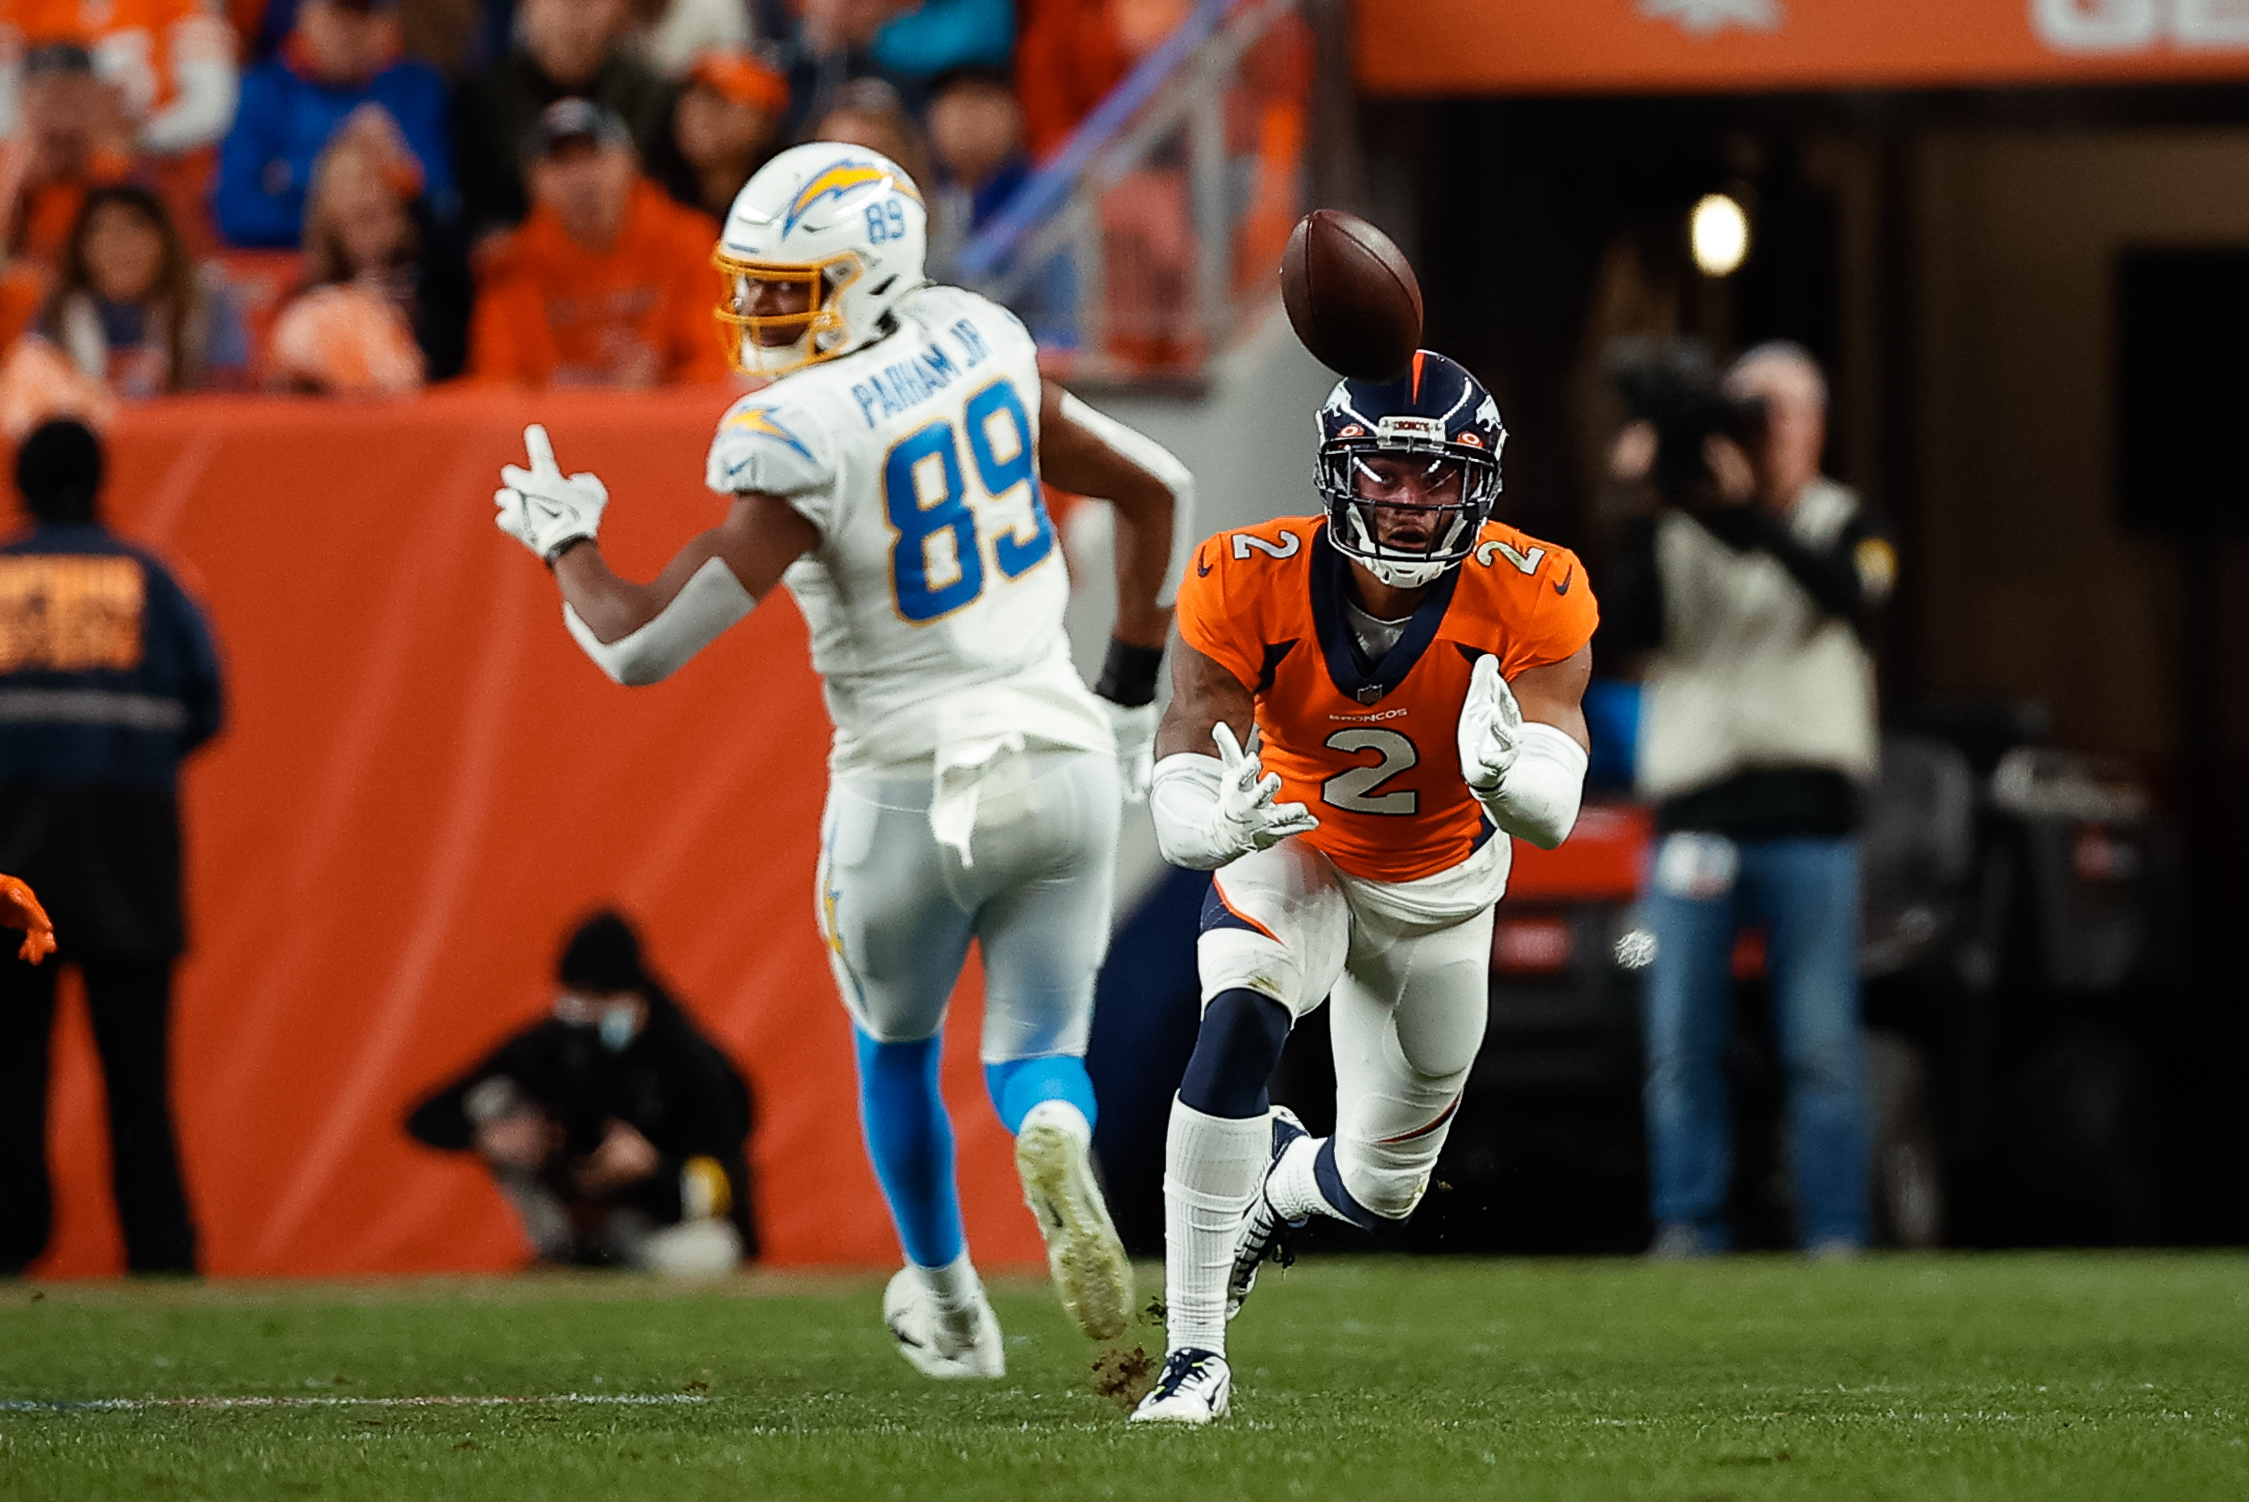 Broncos win last game of season against Chargers